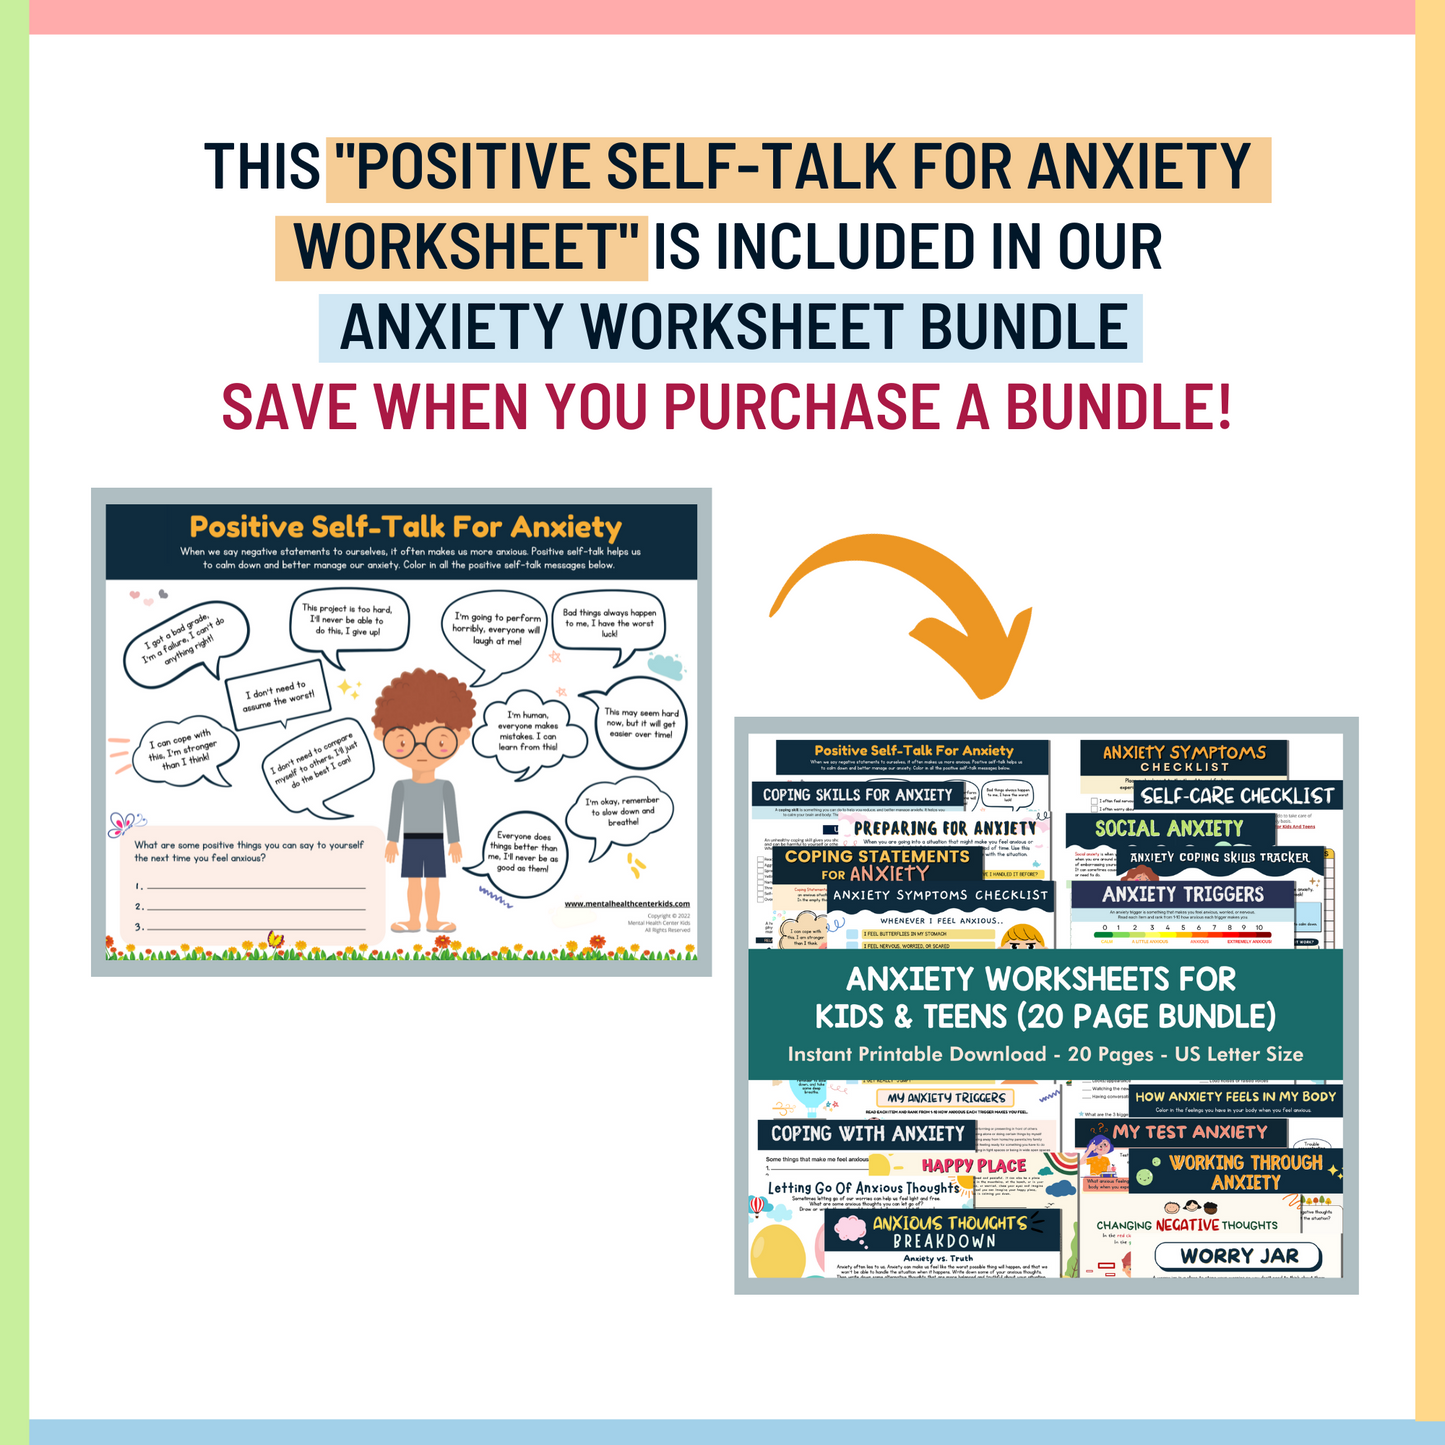 Positive Self-Talk for Anxiety